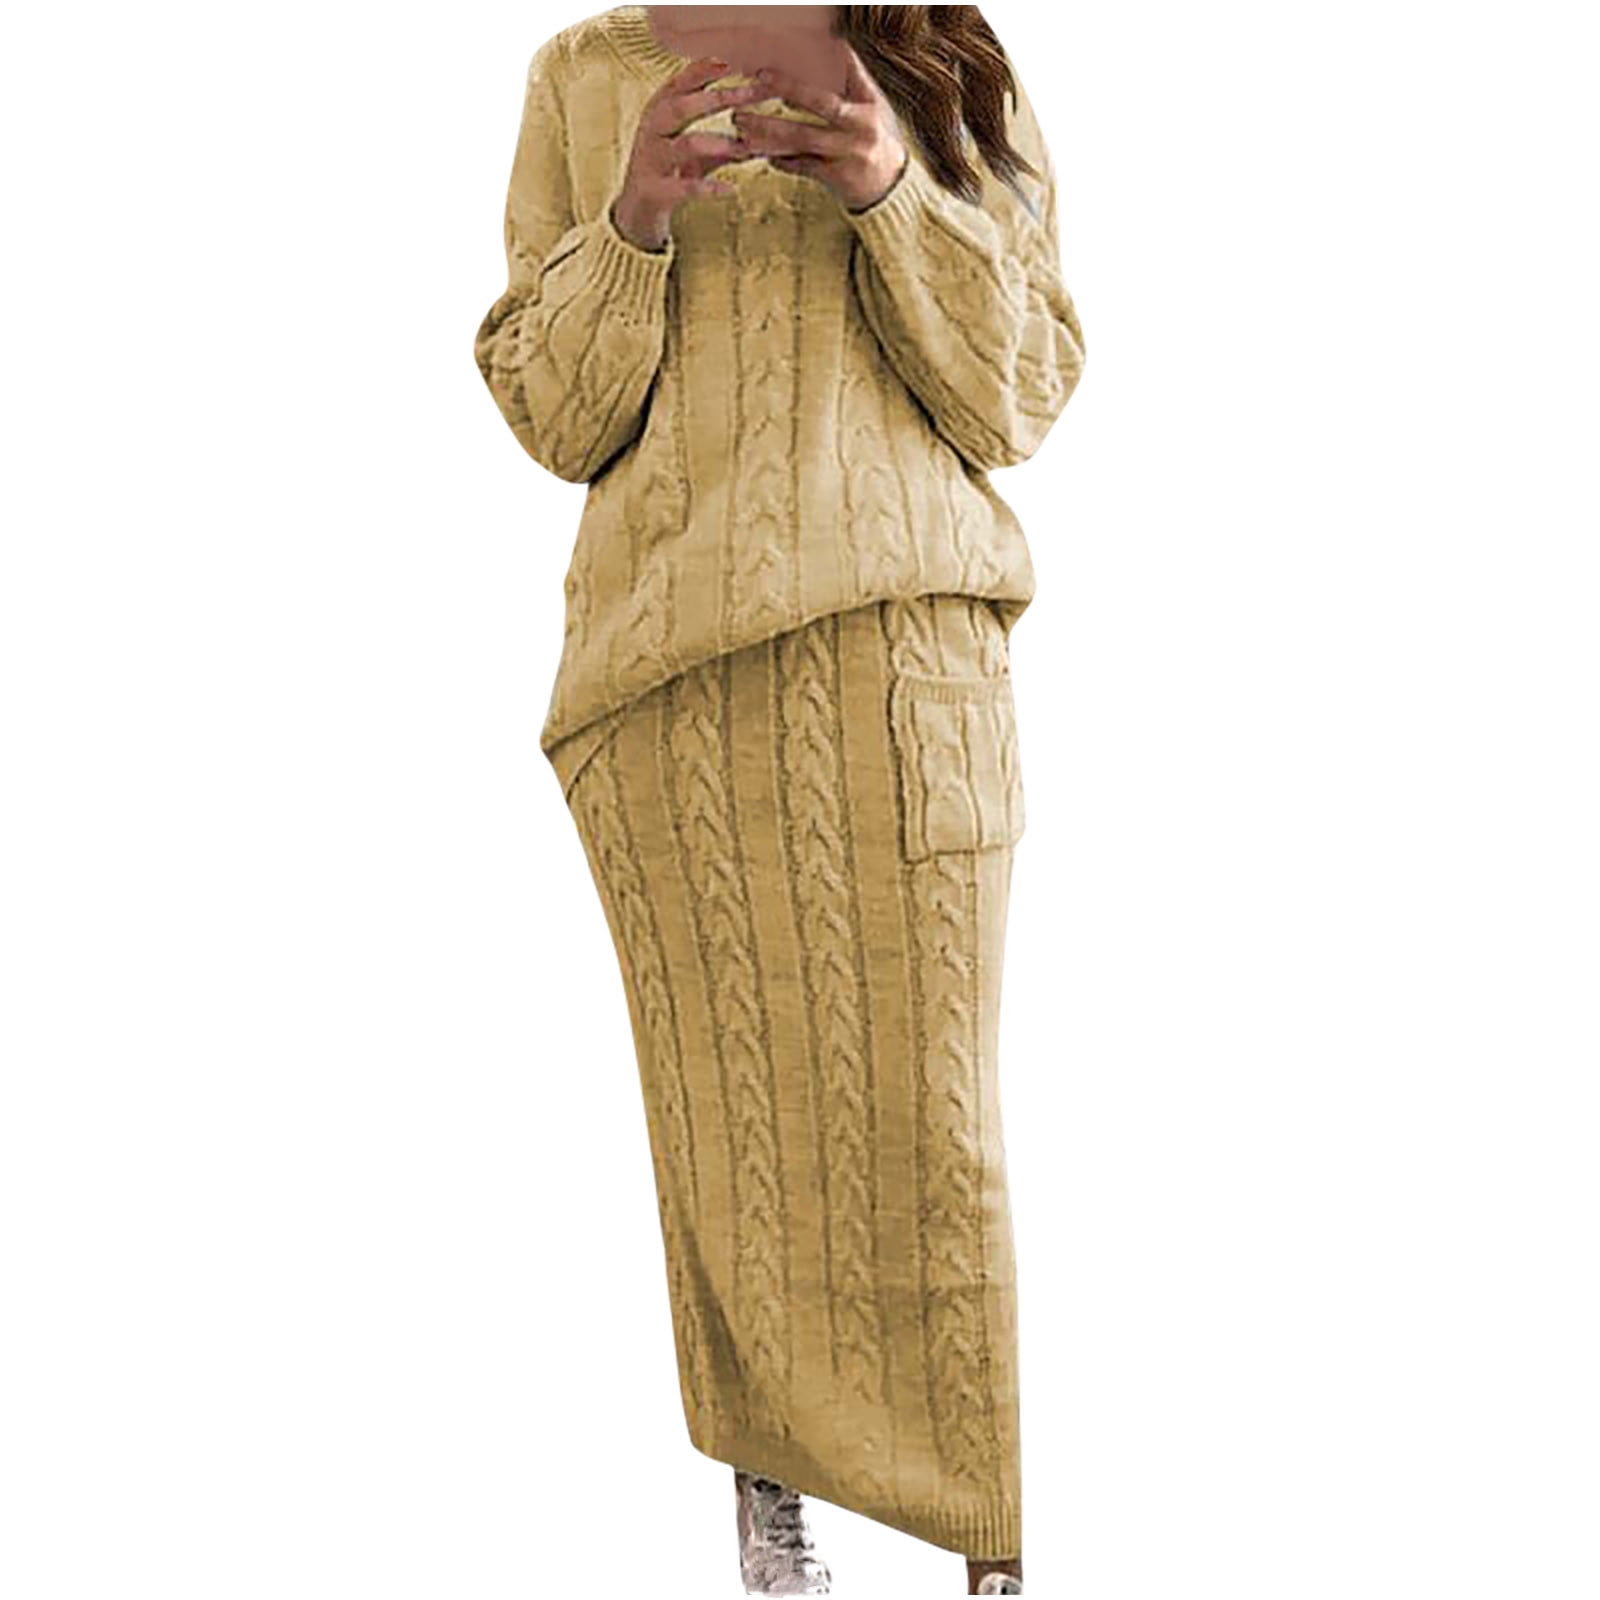 Women's Winter Chunky Cable Knit Long Skirt 2 Piece Outfit Long Sleeve ...